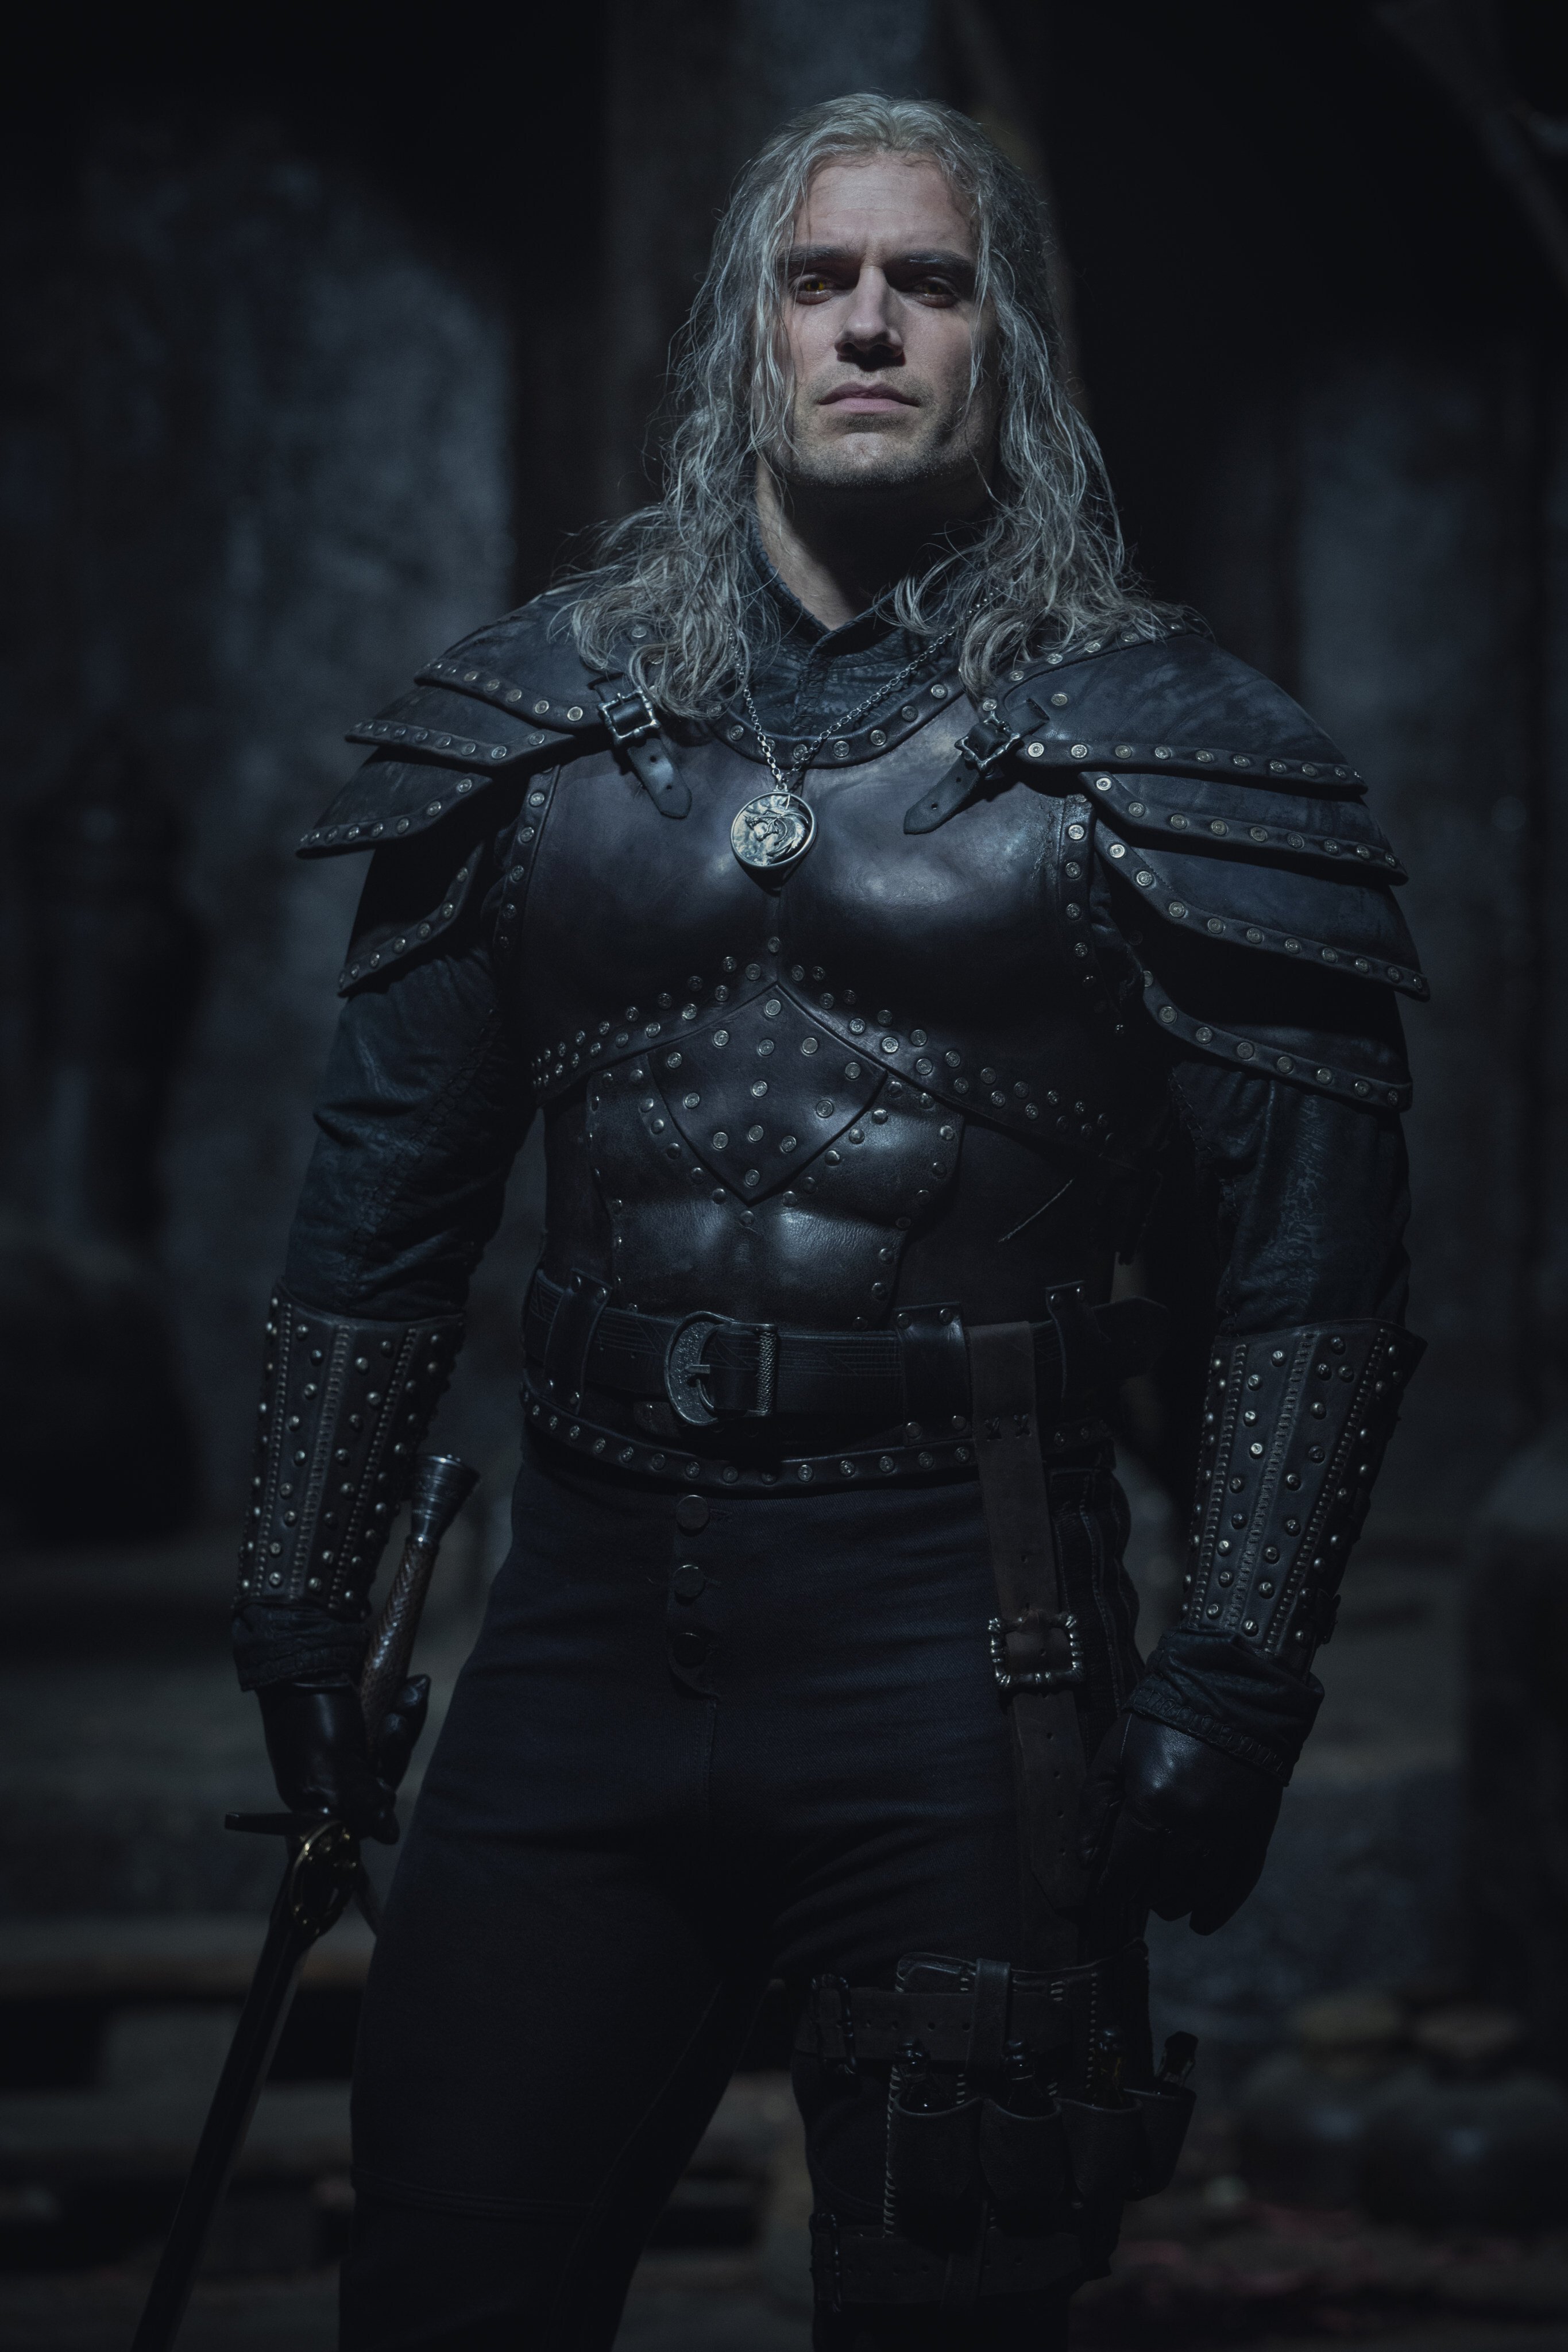 Henry Cavill as Witcher Geralt of Rivia in Season 2 of Netflix’s The Witcher, set for release on December 17. Photo: Netflix